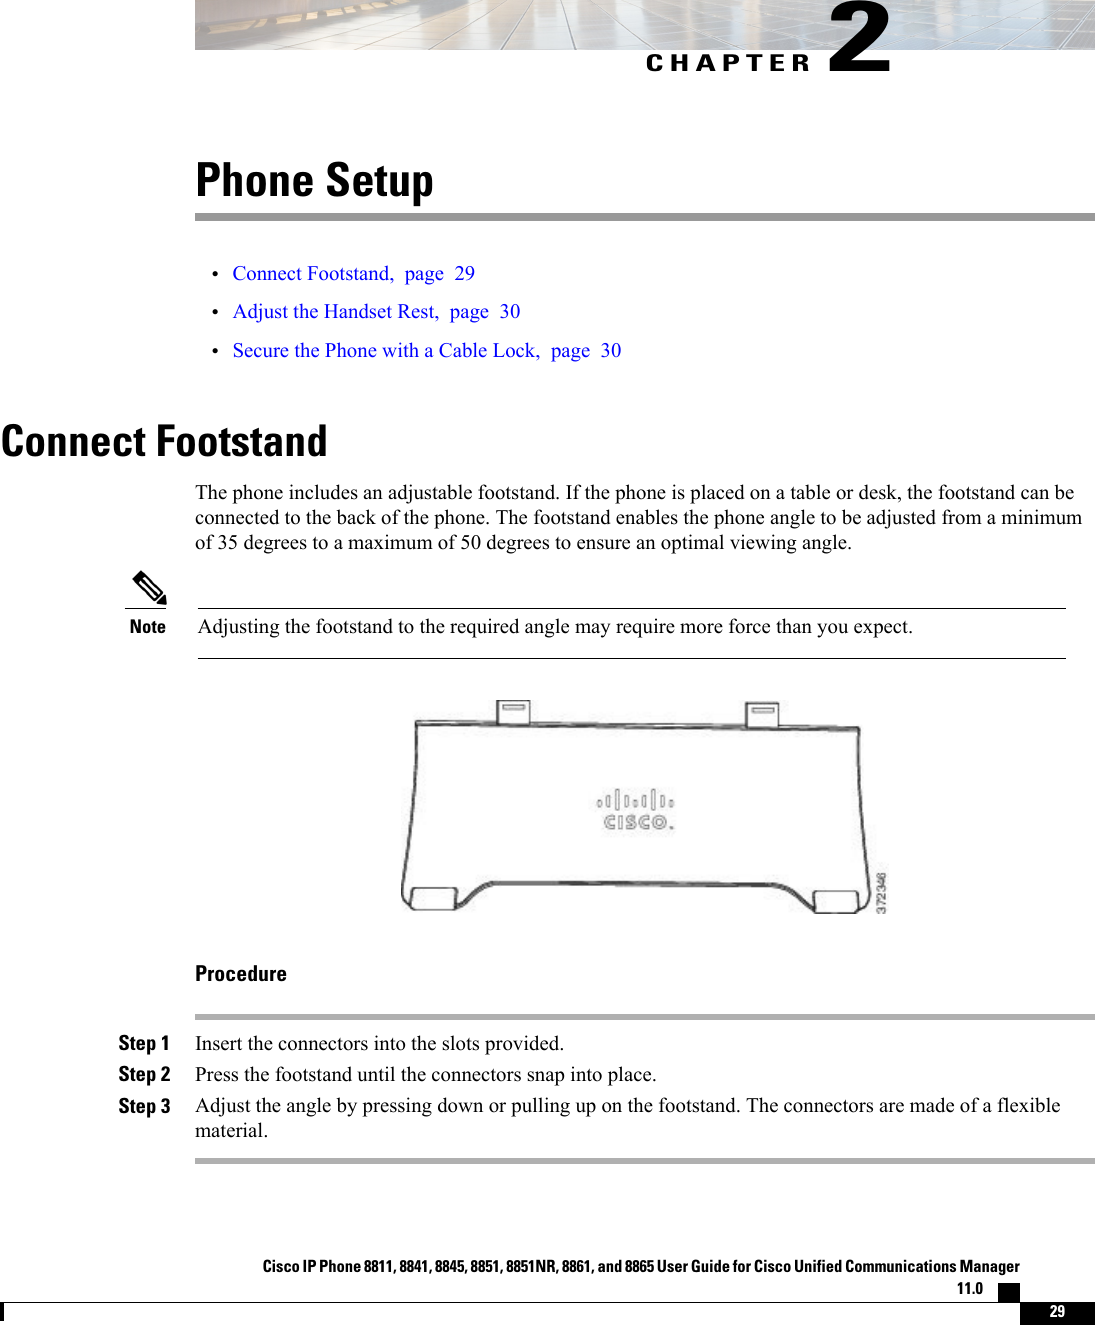 CHAPTER 2Phone Setup•Connect Footstand, page 29•Adjust the Handset Rest, page 30•Secure the Phone with a Cable Lock, page 30Connect FootstandThe phone includes an adjustable footstand. If the phone is placed on a table or desk, the footstand can beconnected to the back of the phone. The footstand enables the phone angle to be adjusted from a minimumof 35 degrees to a maximum of 50 degrees to ensure an optimal viewing angle.Adjusting the footstand to the required angle may require more force than you expect.NoteProcedureStep 1 Insert the connectors into the slots provided.Step 2 Press the footstand until the connectors snap into place.Step 3 Adjust the angle by pressing down or pulling up on the footstand. The connectors are made of a flexiblematerial.Cisco IP Phone 8811, 8841, 8845, 8851, 8851NR, 8861, and 8865 User Guide for Cisco Unified Communications Manager11.0    29